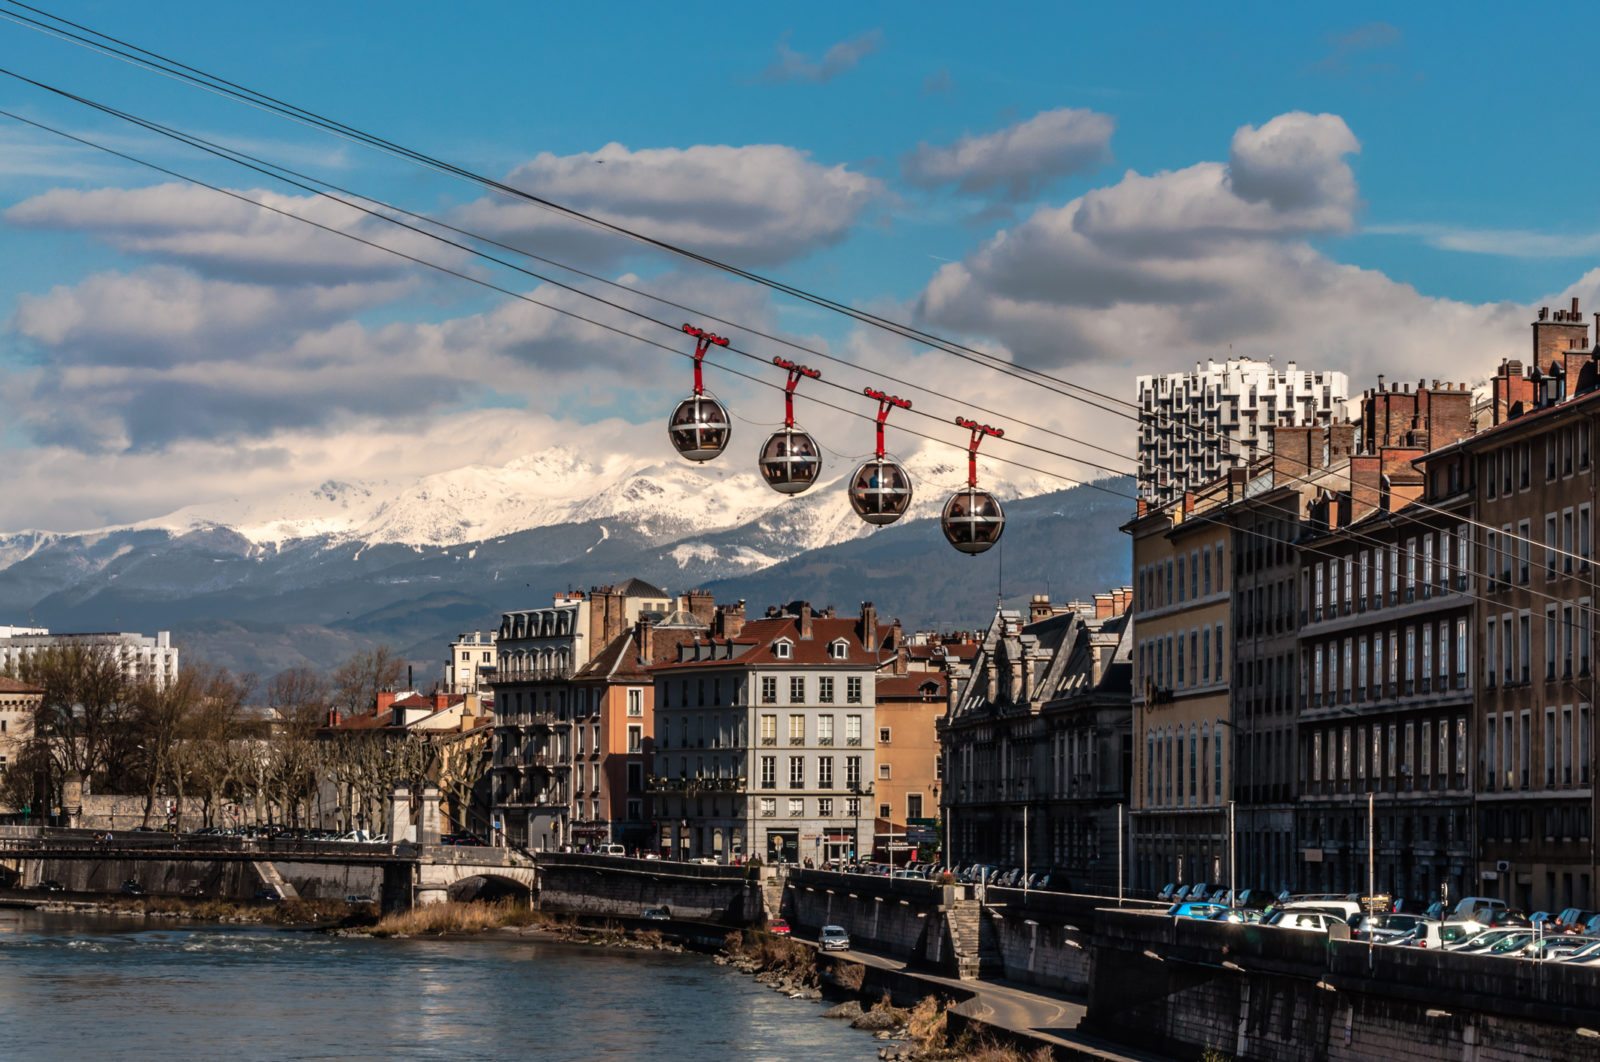 Grenoble Airport Transfers. Airport transfers to ski areas such as Espace Killy and the Three Valleys